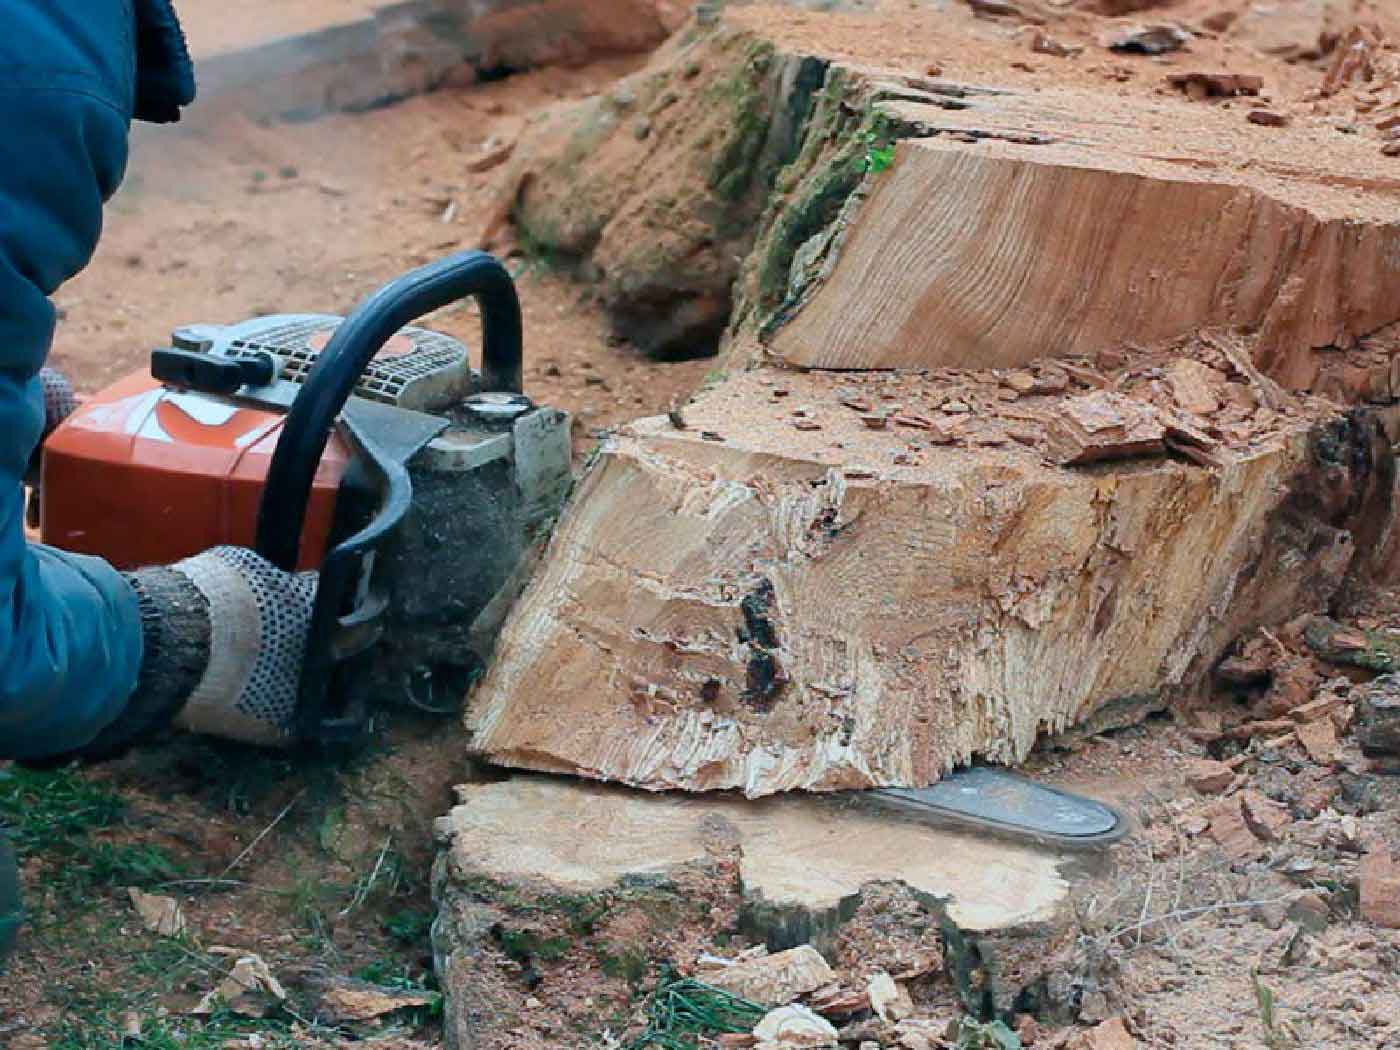 Fellers Tree Felling, Professional Tree Fellers, Very Good Rates, Tree Felling Services, Garden Cleaning Service, Excellent Safety And Service Record